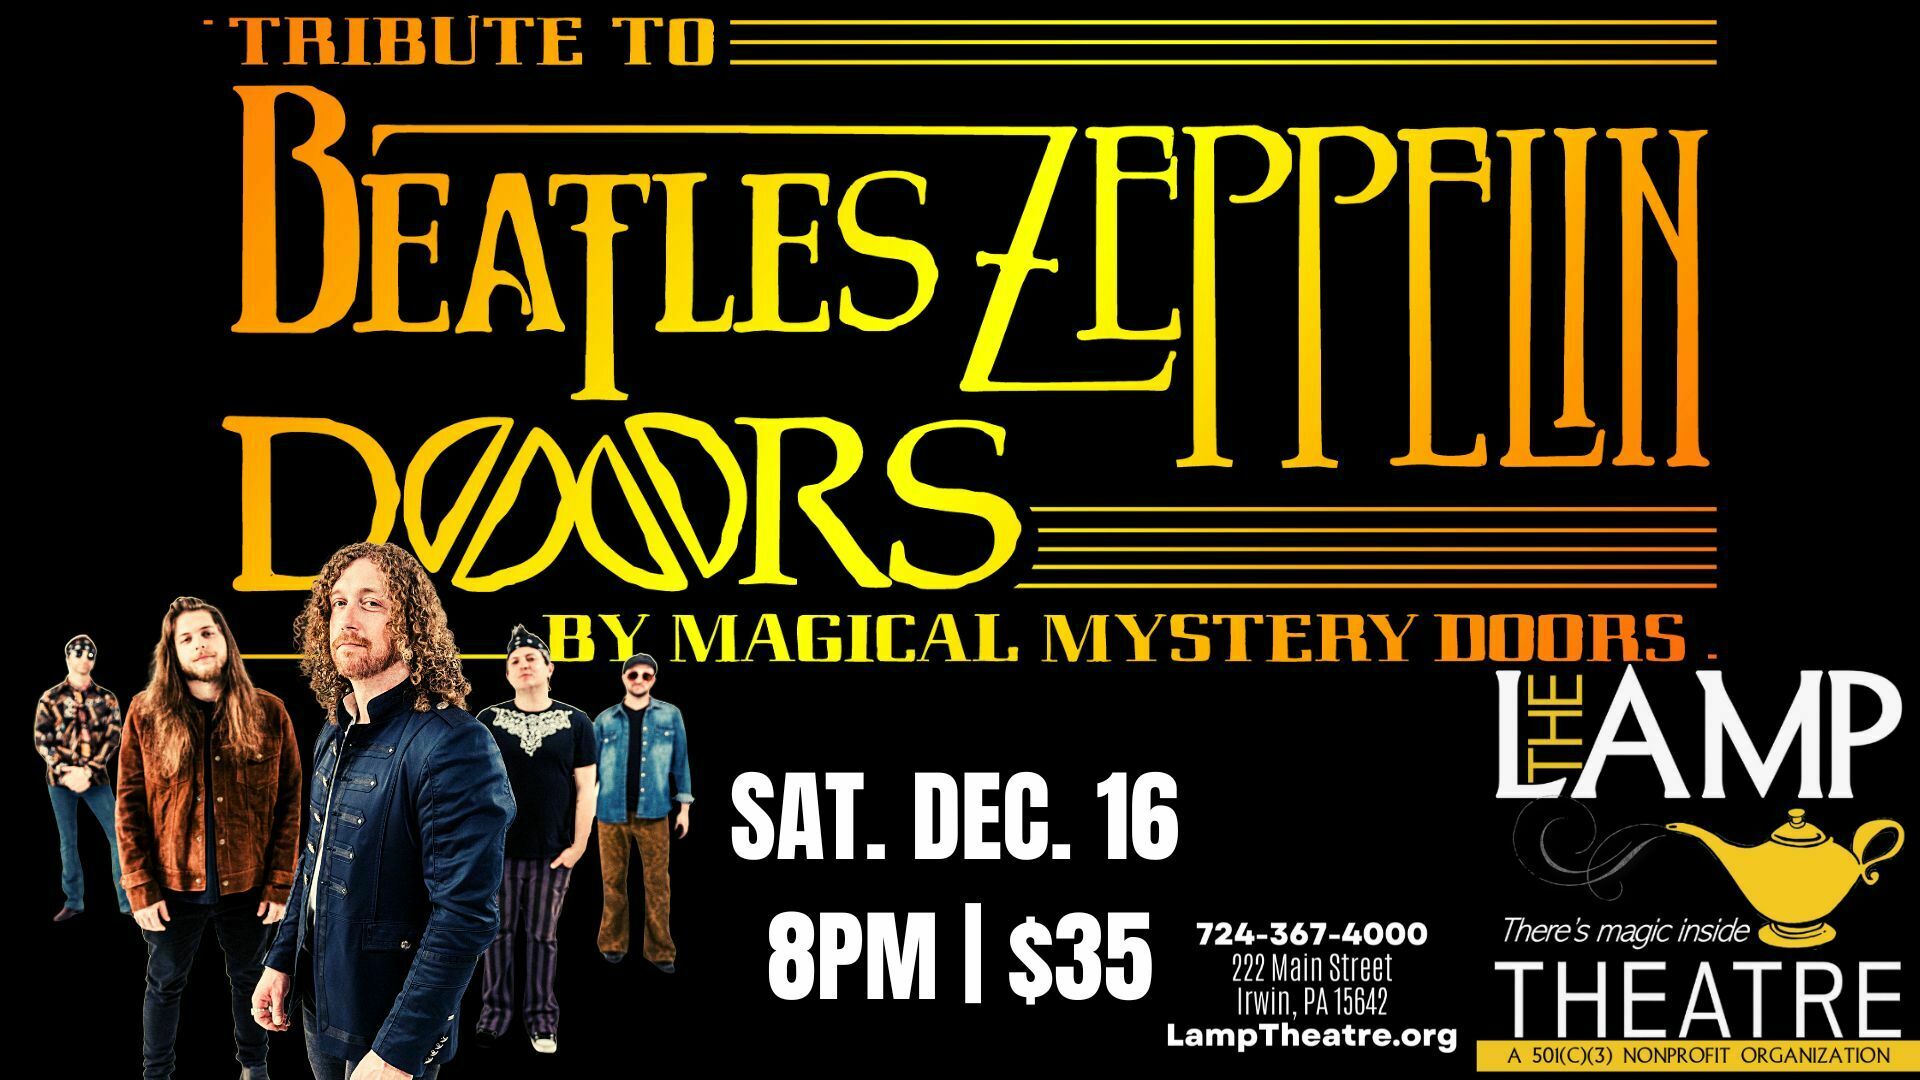 The Magical Mystery Doors: a tribute to the Beatles, Led Zeppelin and The Doors, Irwin, Pennsylvania, United States